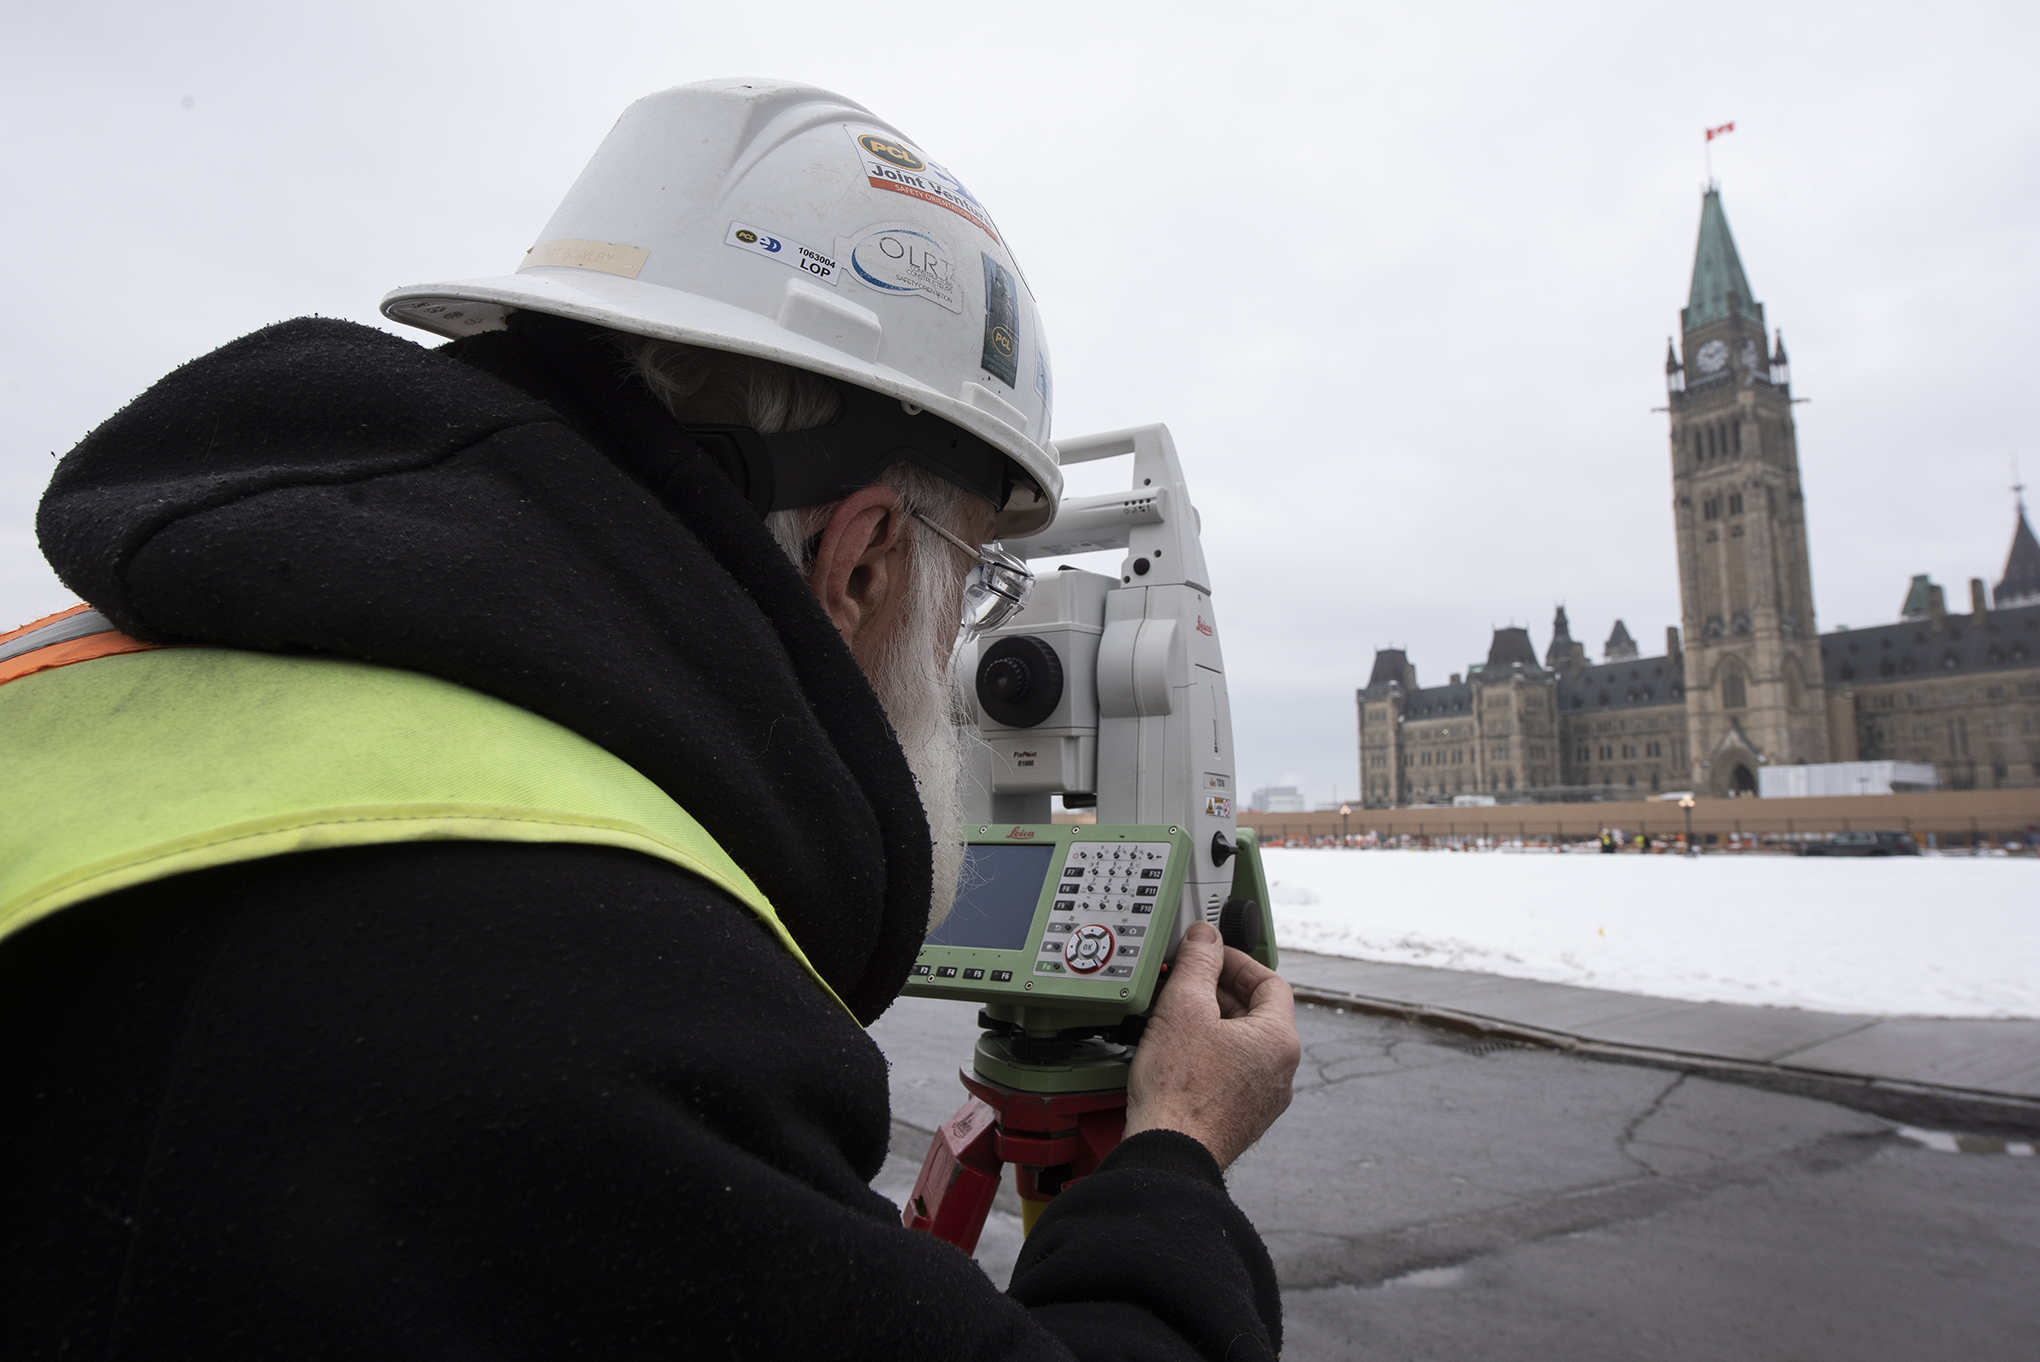 A man looks at a Gothic-style building through surveying equipment.